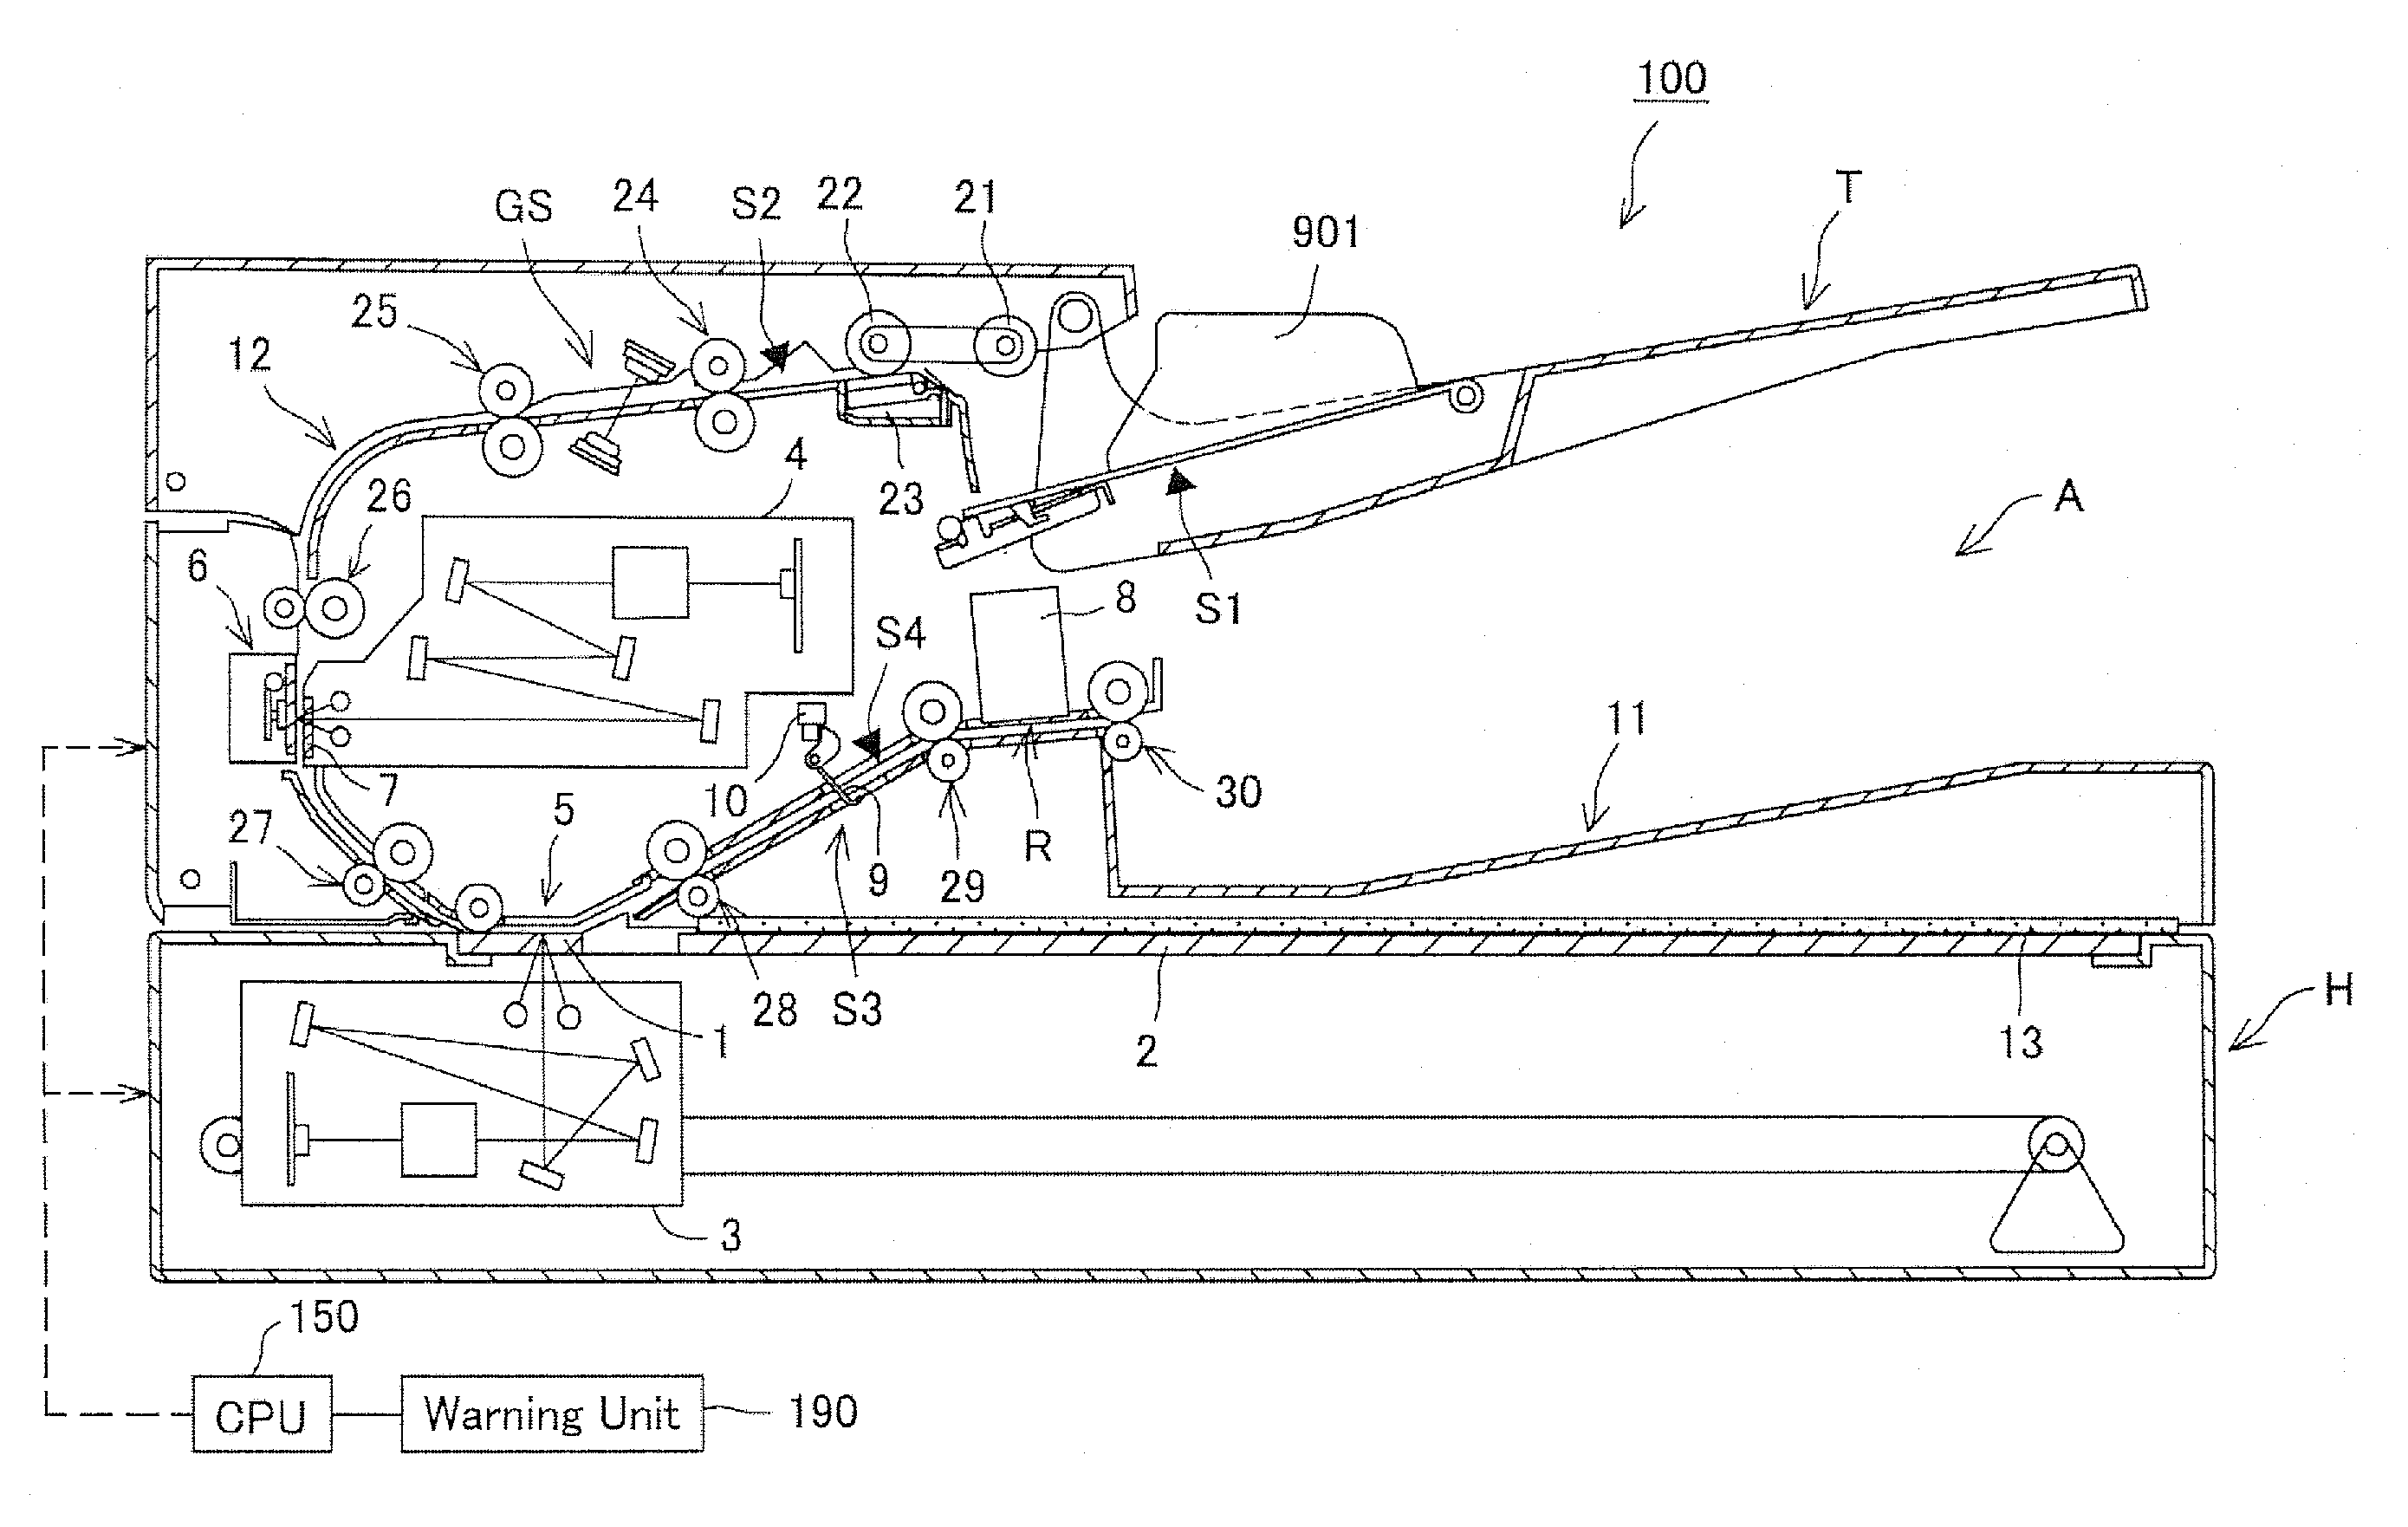 Document Feeder and Image Capturing Device